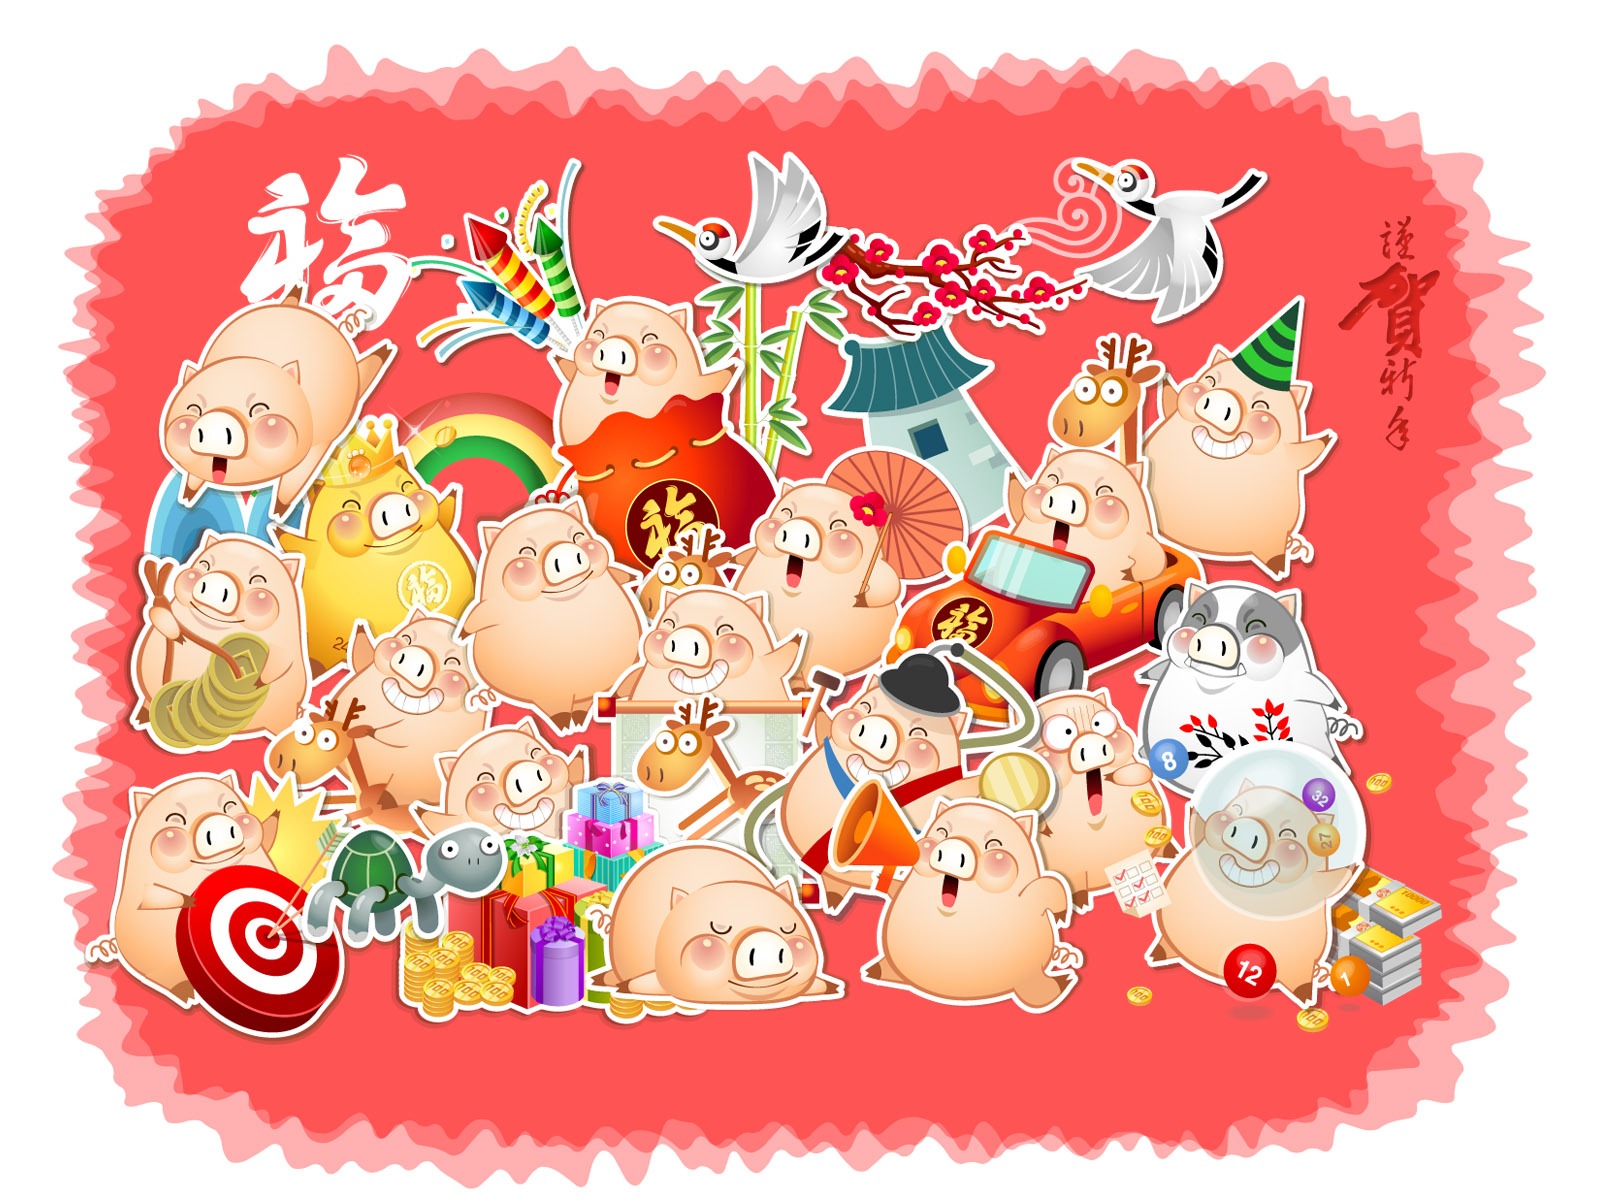 Year of the Pig Theme Wallpaper #11 - 1600x1200